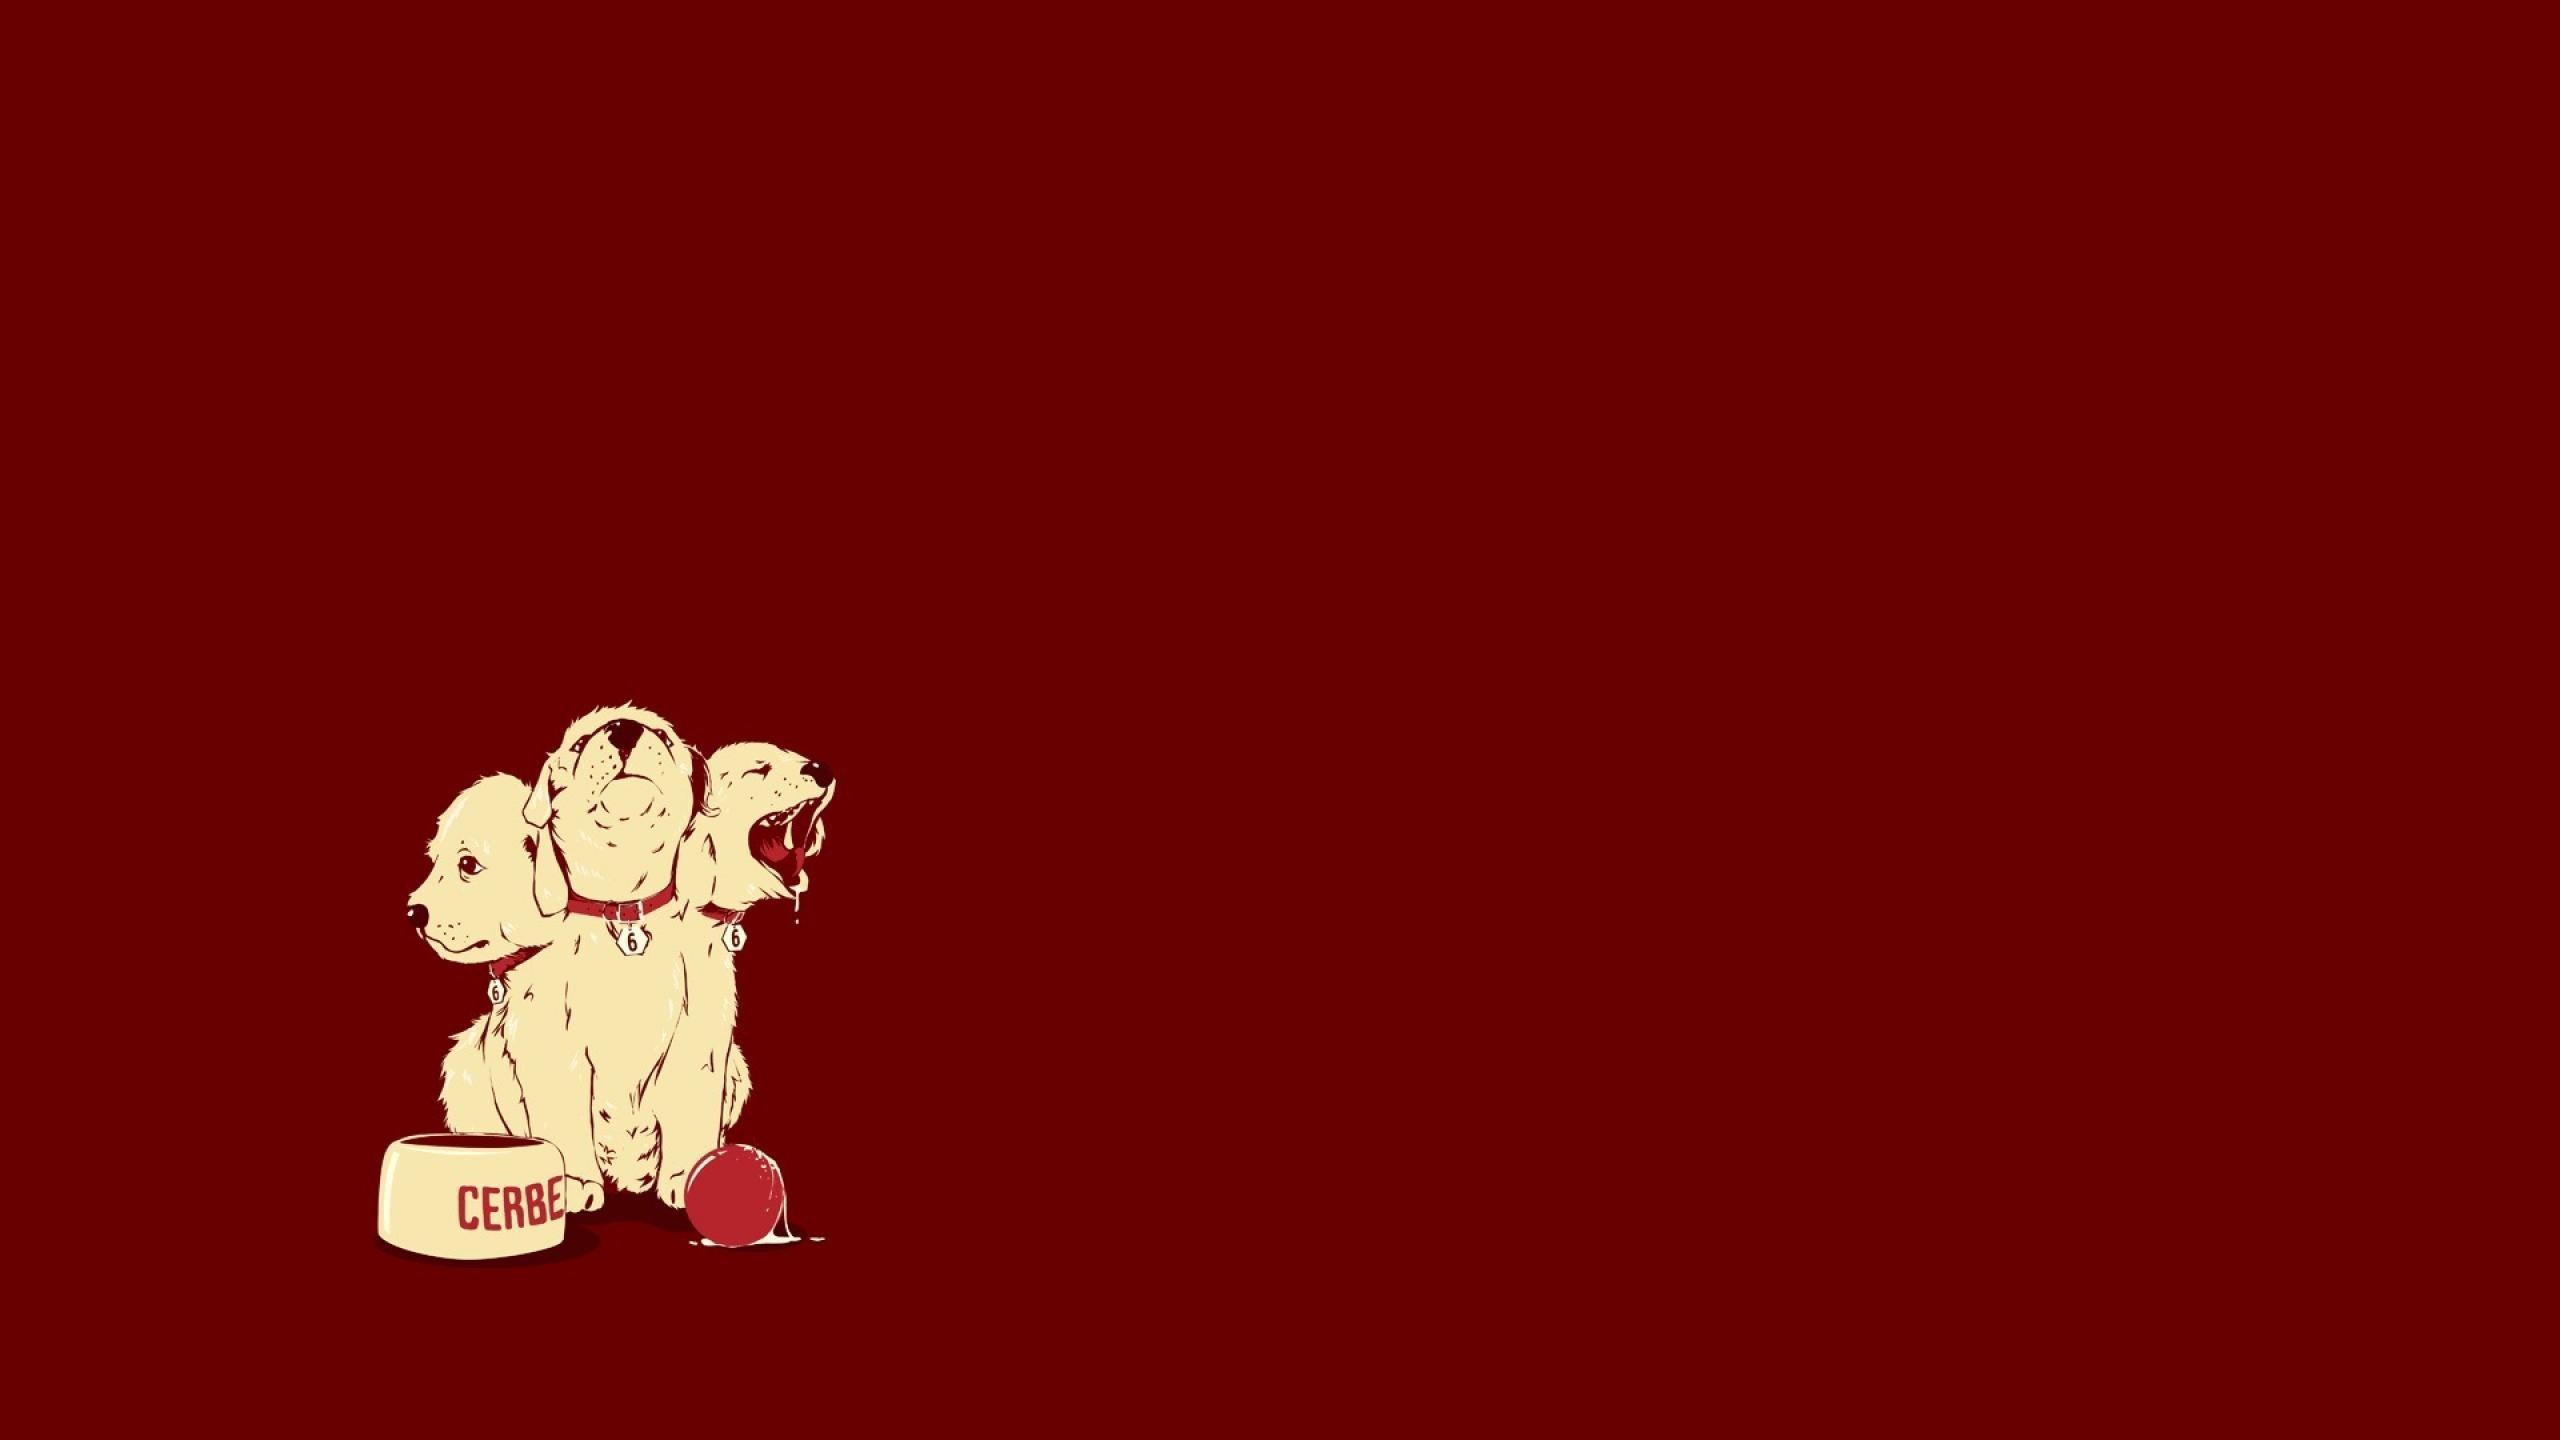 General 2560x1440 Cerberus puppies dog red background simple background